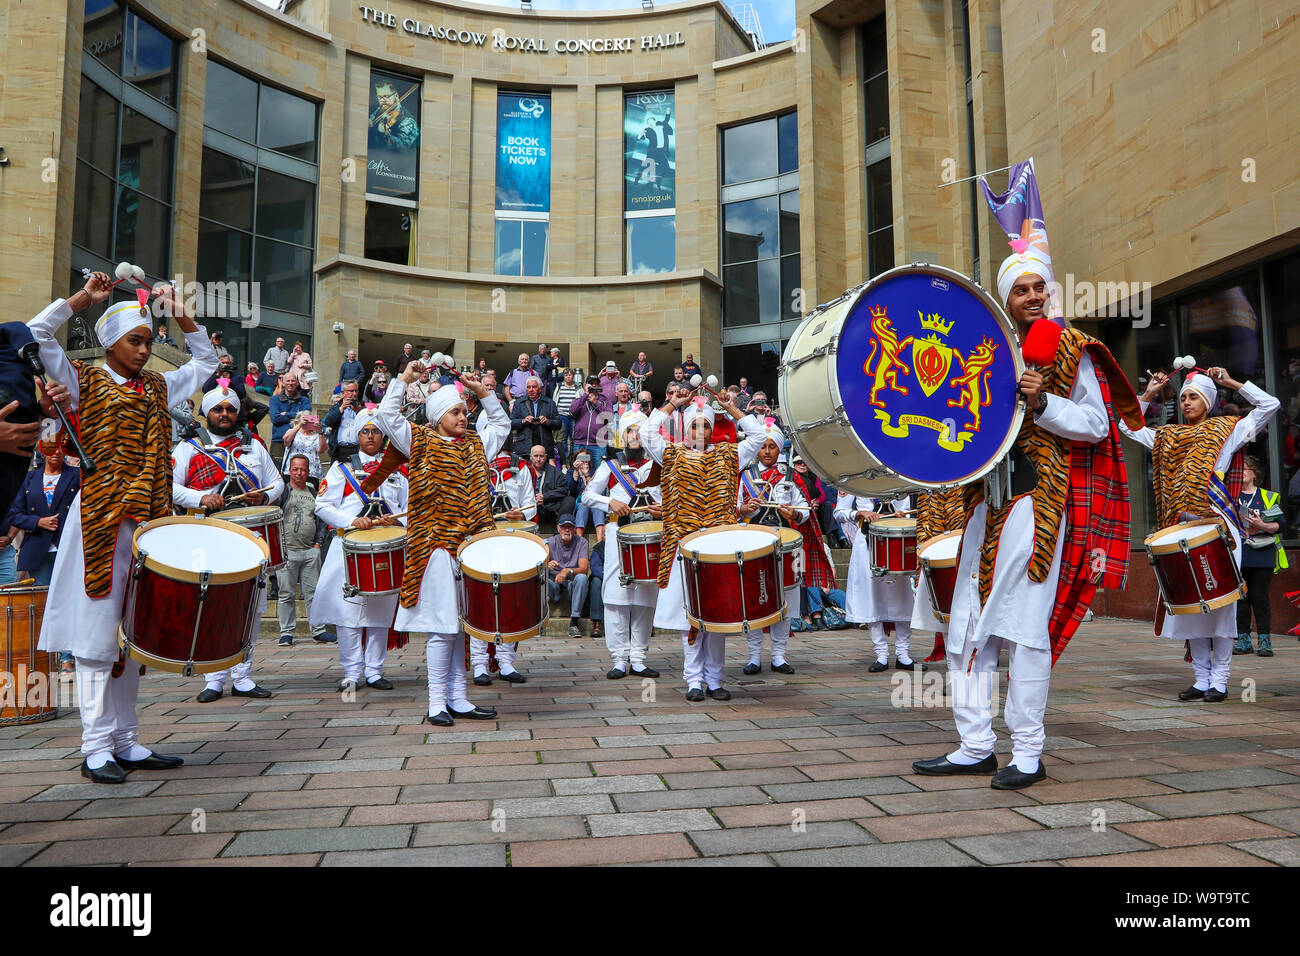 Glasgow, UK. 15 August 2019.  Piping Live, thought to be the biggest celebration of bagpipe music and pipe bands continues to attract large audiences and entertain with free performances in Buchanan Street in Glasgow's City Centre from international pipe bands. Sri Dasmesh Pipe band from Malaysia entertain. Credit: Findlay/Alamy Live News Stock Photo